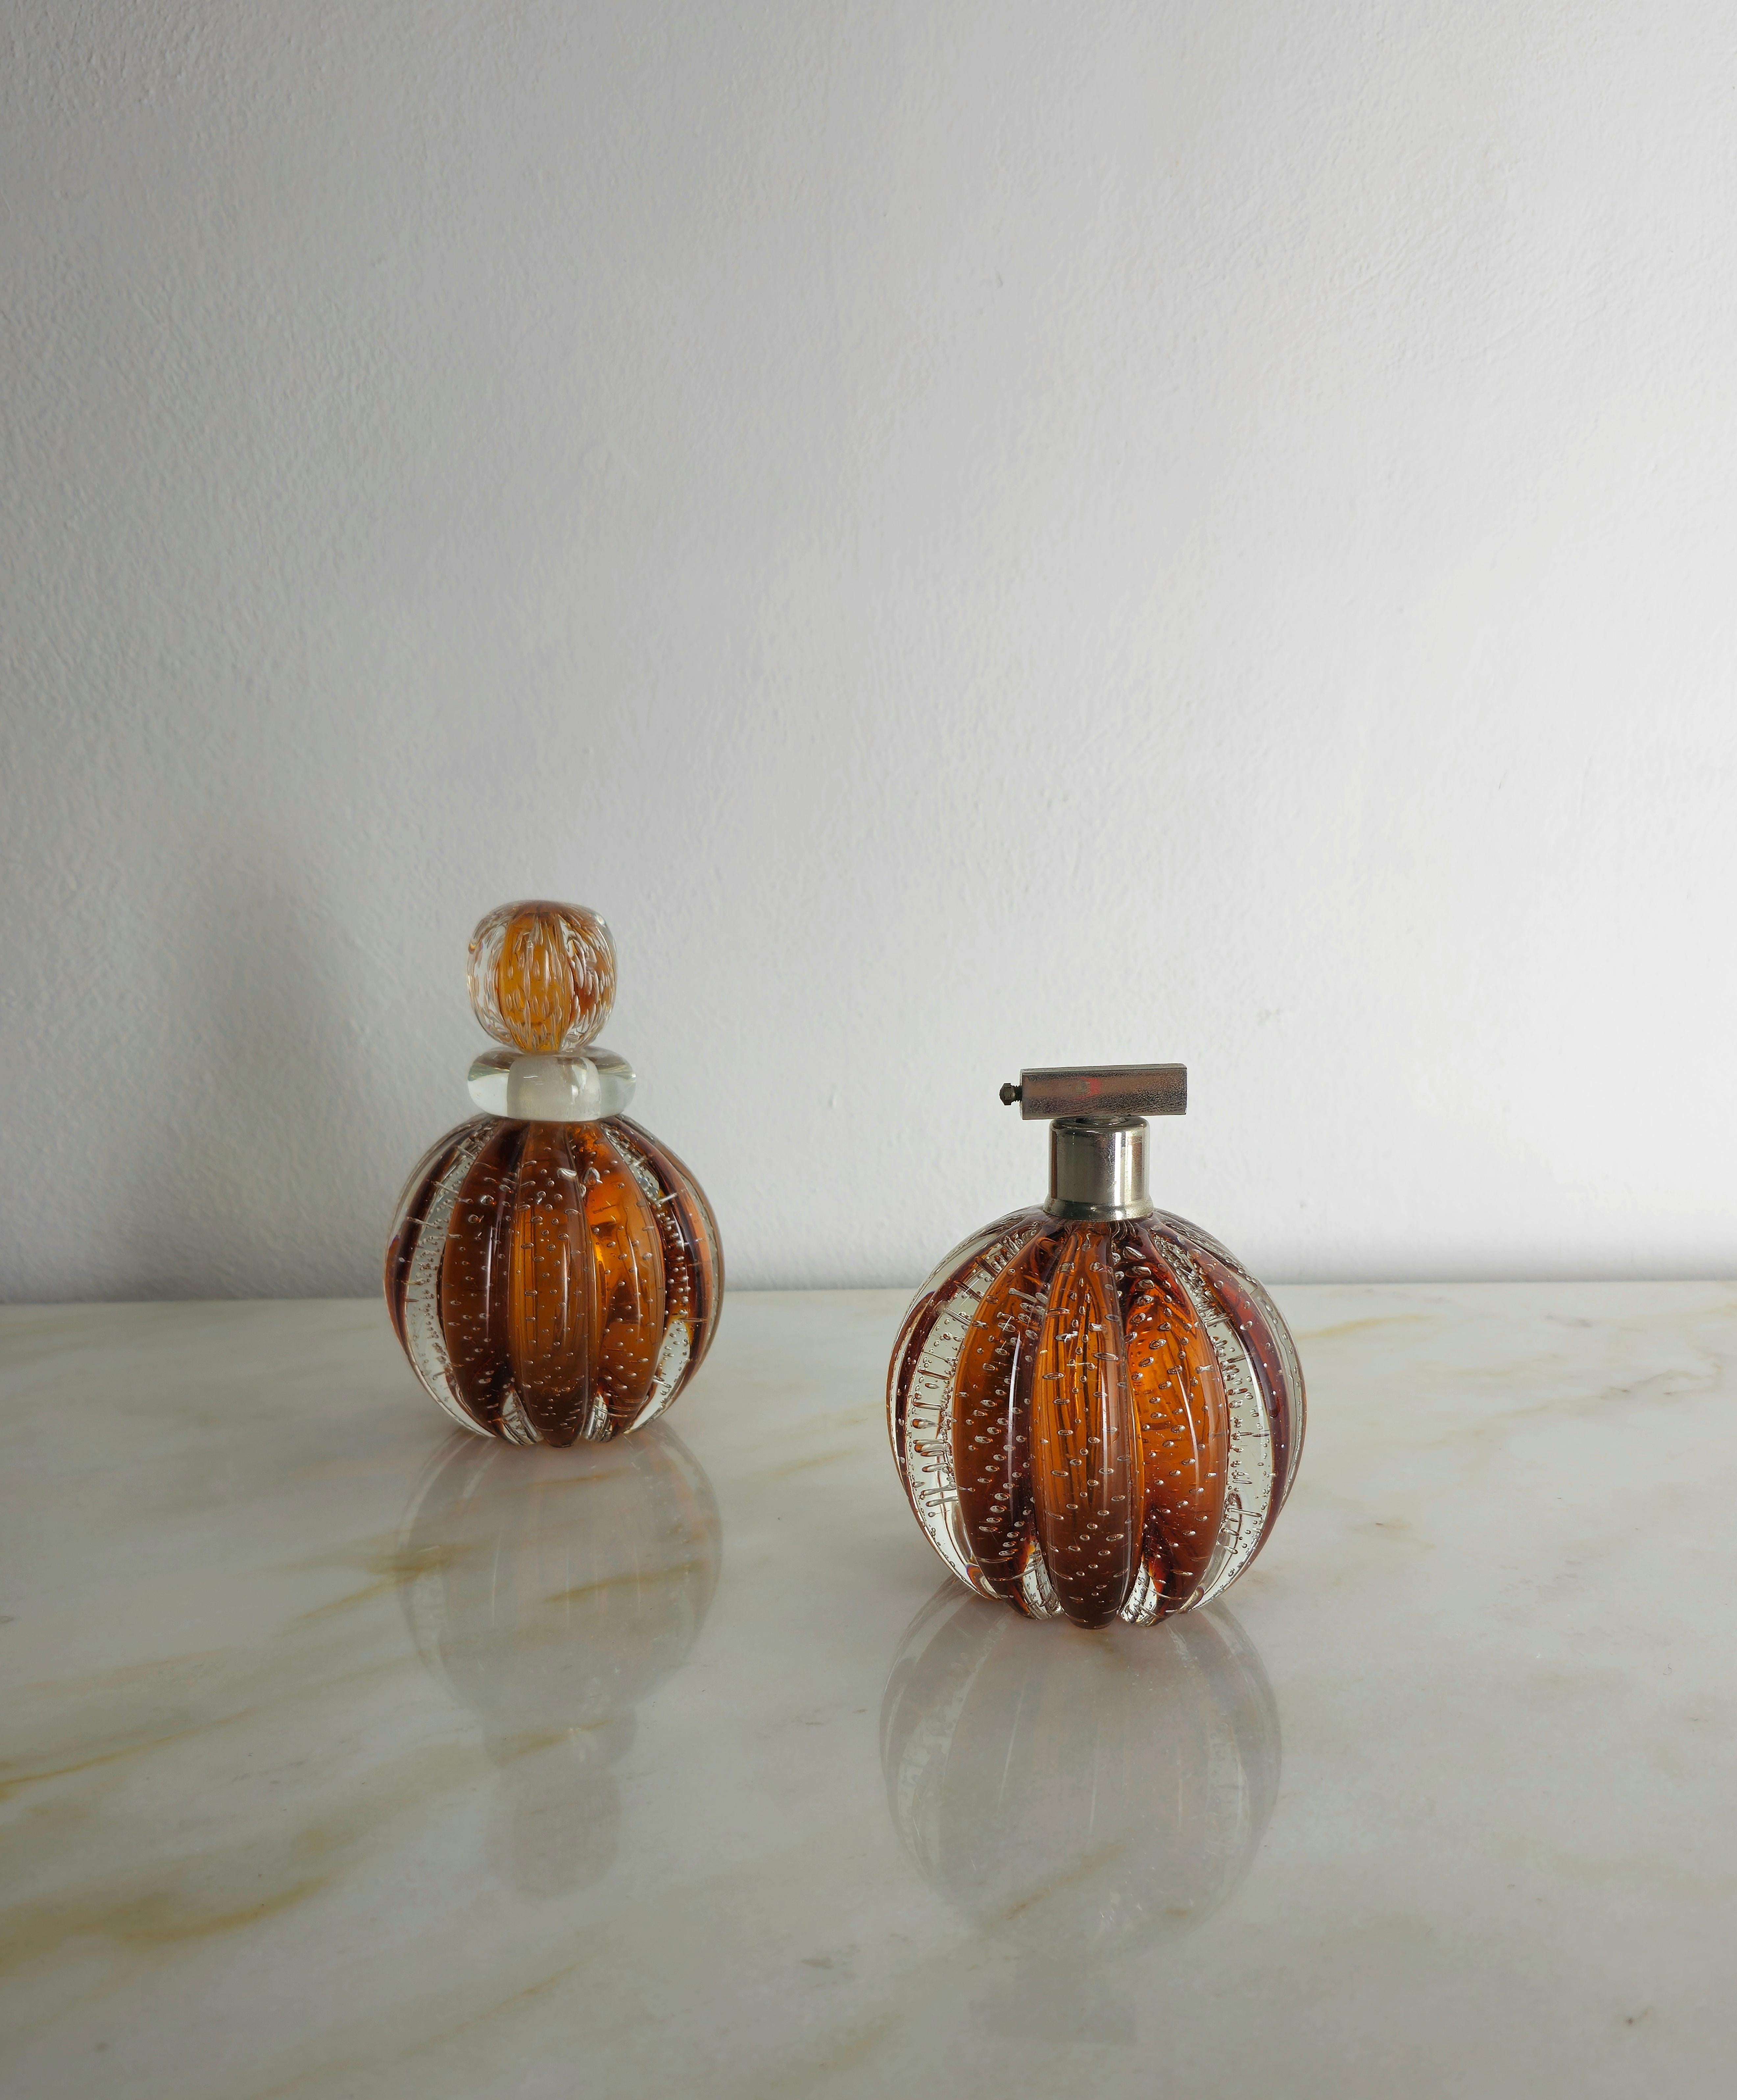 I would like to point out that this bullicante Murano glass set by Seguso is sold only as a decorative or display object, as it has lost its original functionality. Italy in the 50s.


Note: We try to offer our customers an excellent service even in